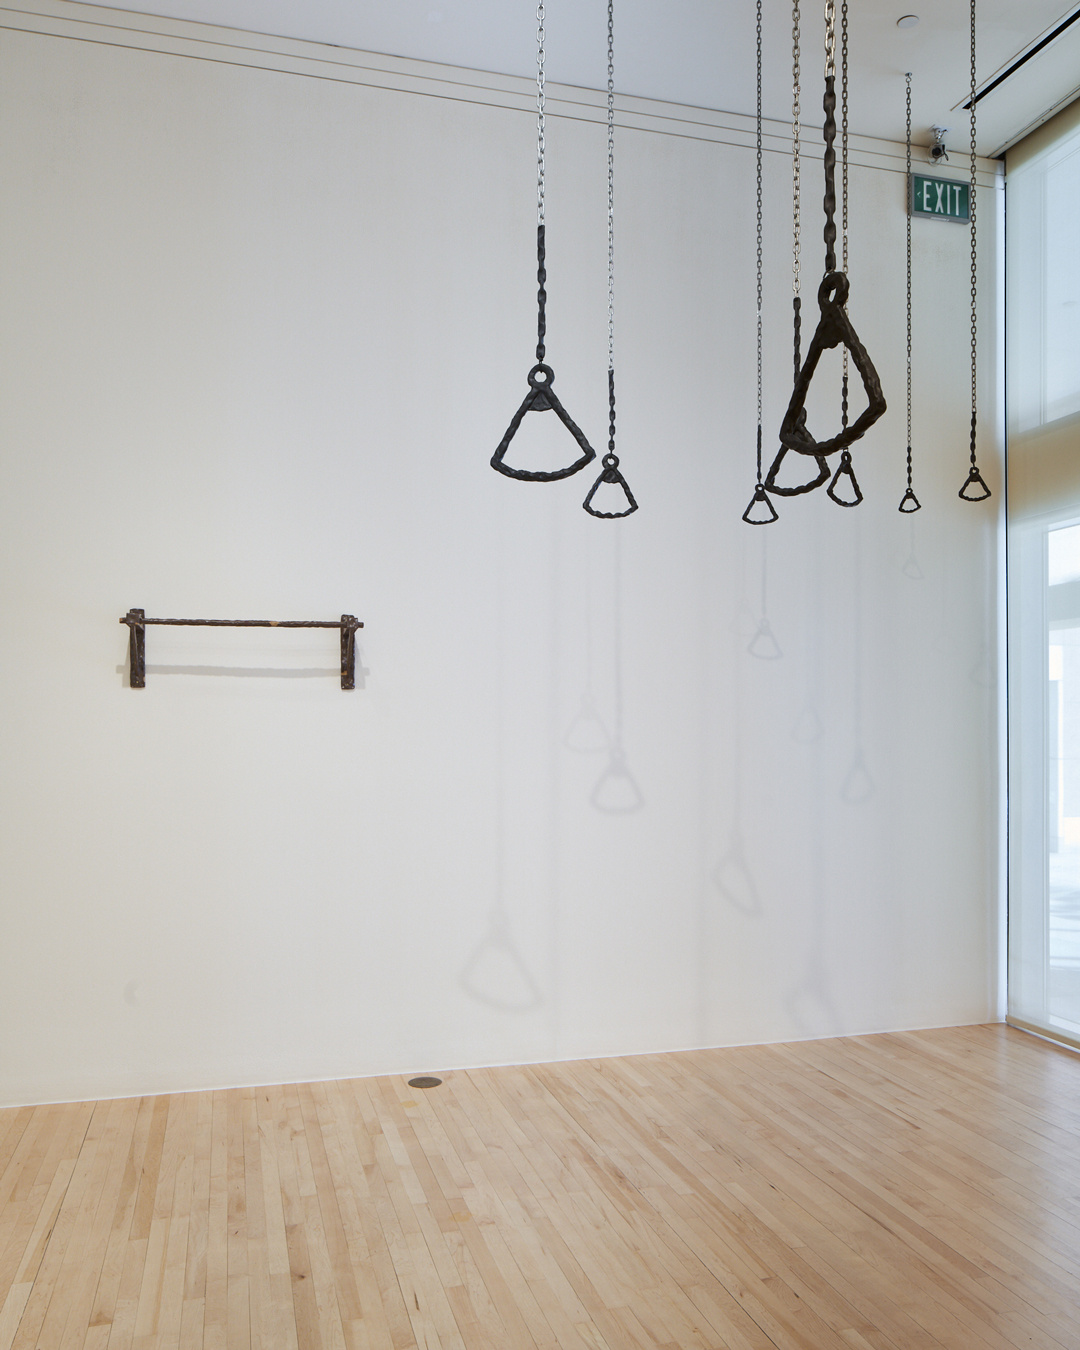 An off-white gallery wall is barren except for a small, metal pull-up bar positioned on the wall's left, midway to the ceiling. In the upper right quadrant, eight black trapeze pull up bars hang from chains on the ceiling and cast faint shadows onto the gallery wall.